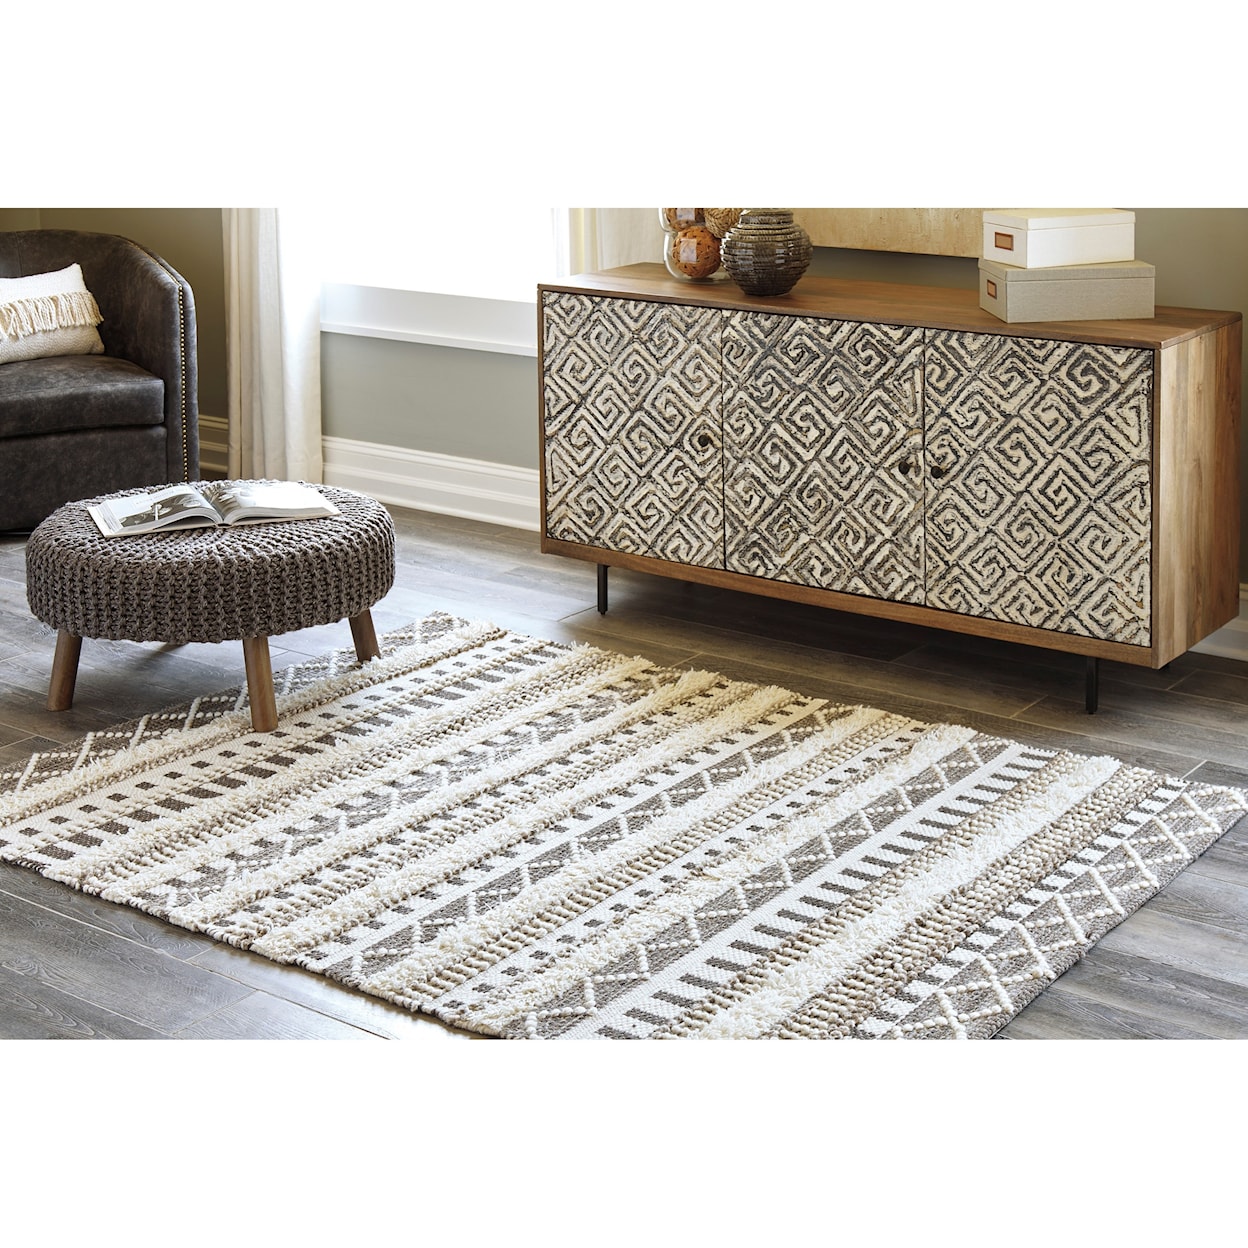 Ashley Furniture Signature Design Contemporary Area Rugs Karalee Ivory/Brown Large Rug